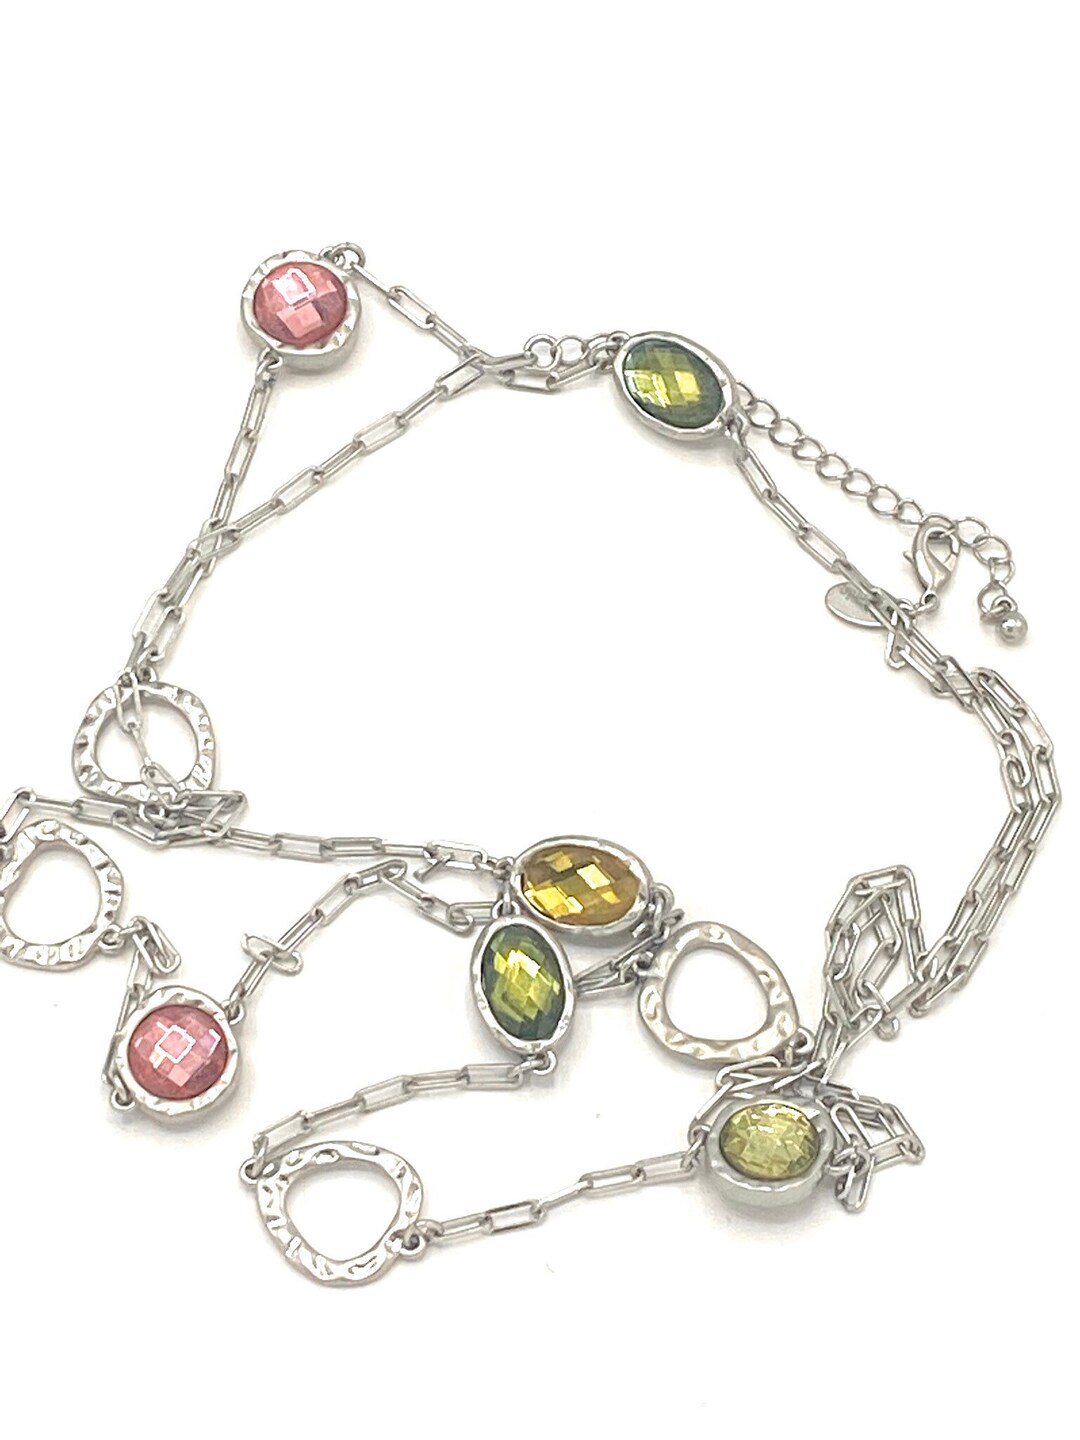 Vintage Nickel Tone With Green and Pink Crystal Necklace by Lia Sophia ...